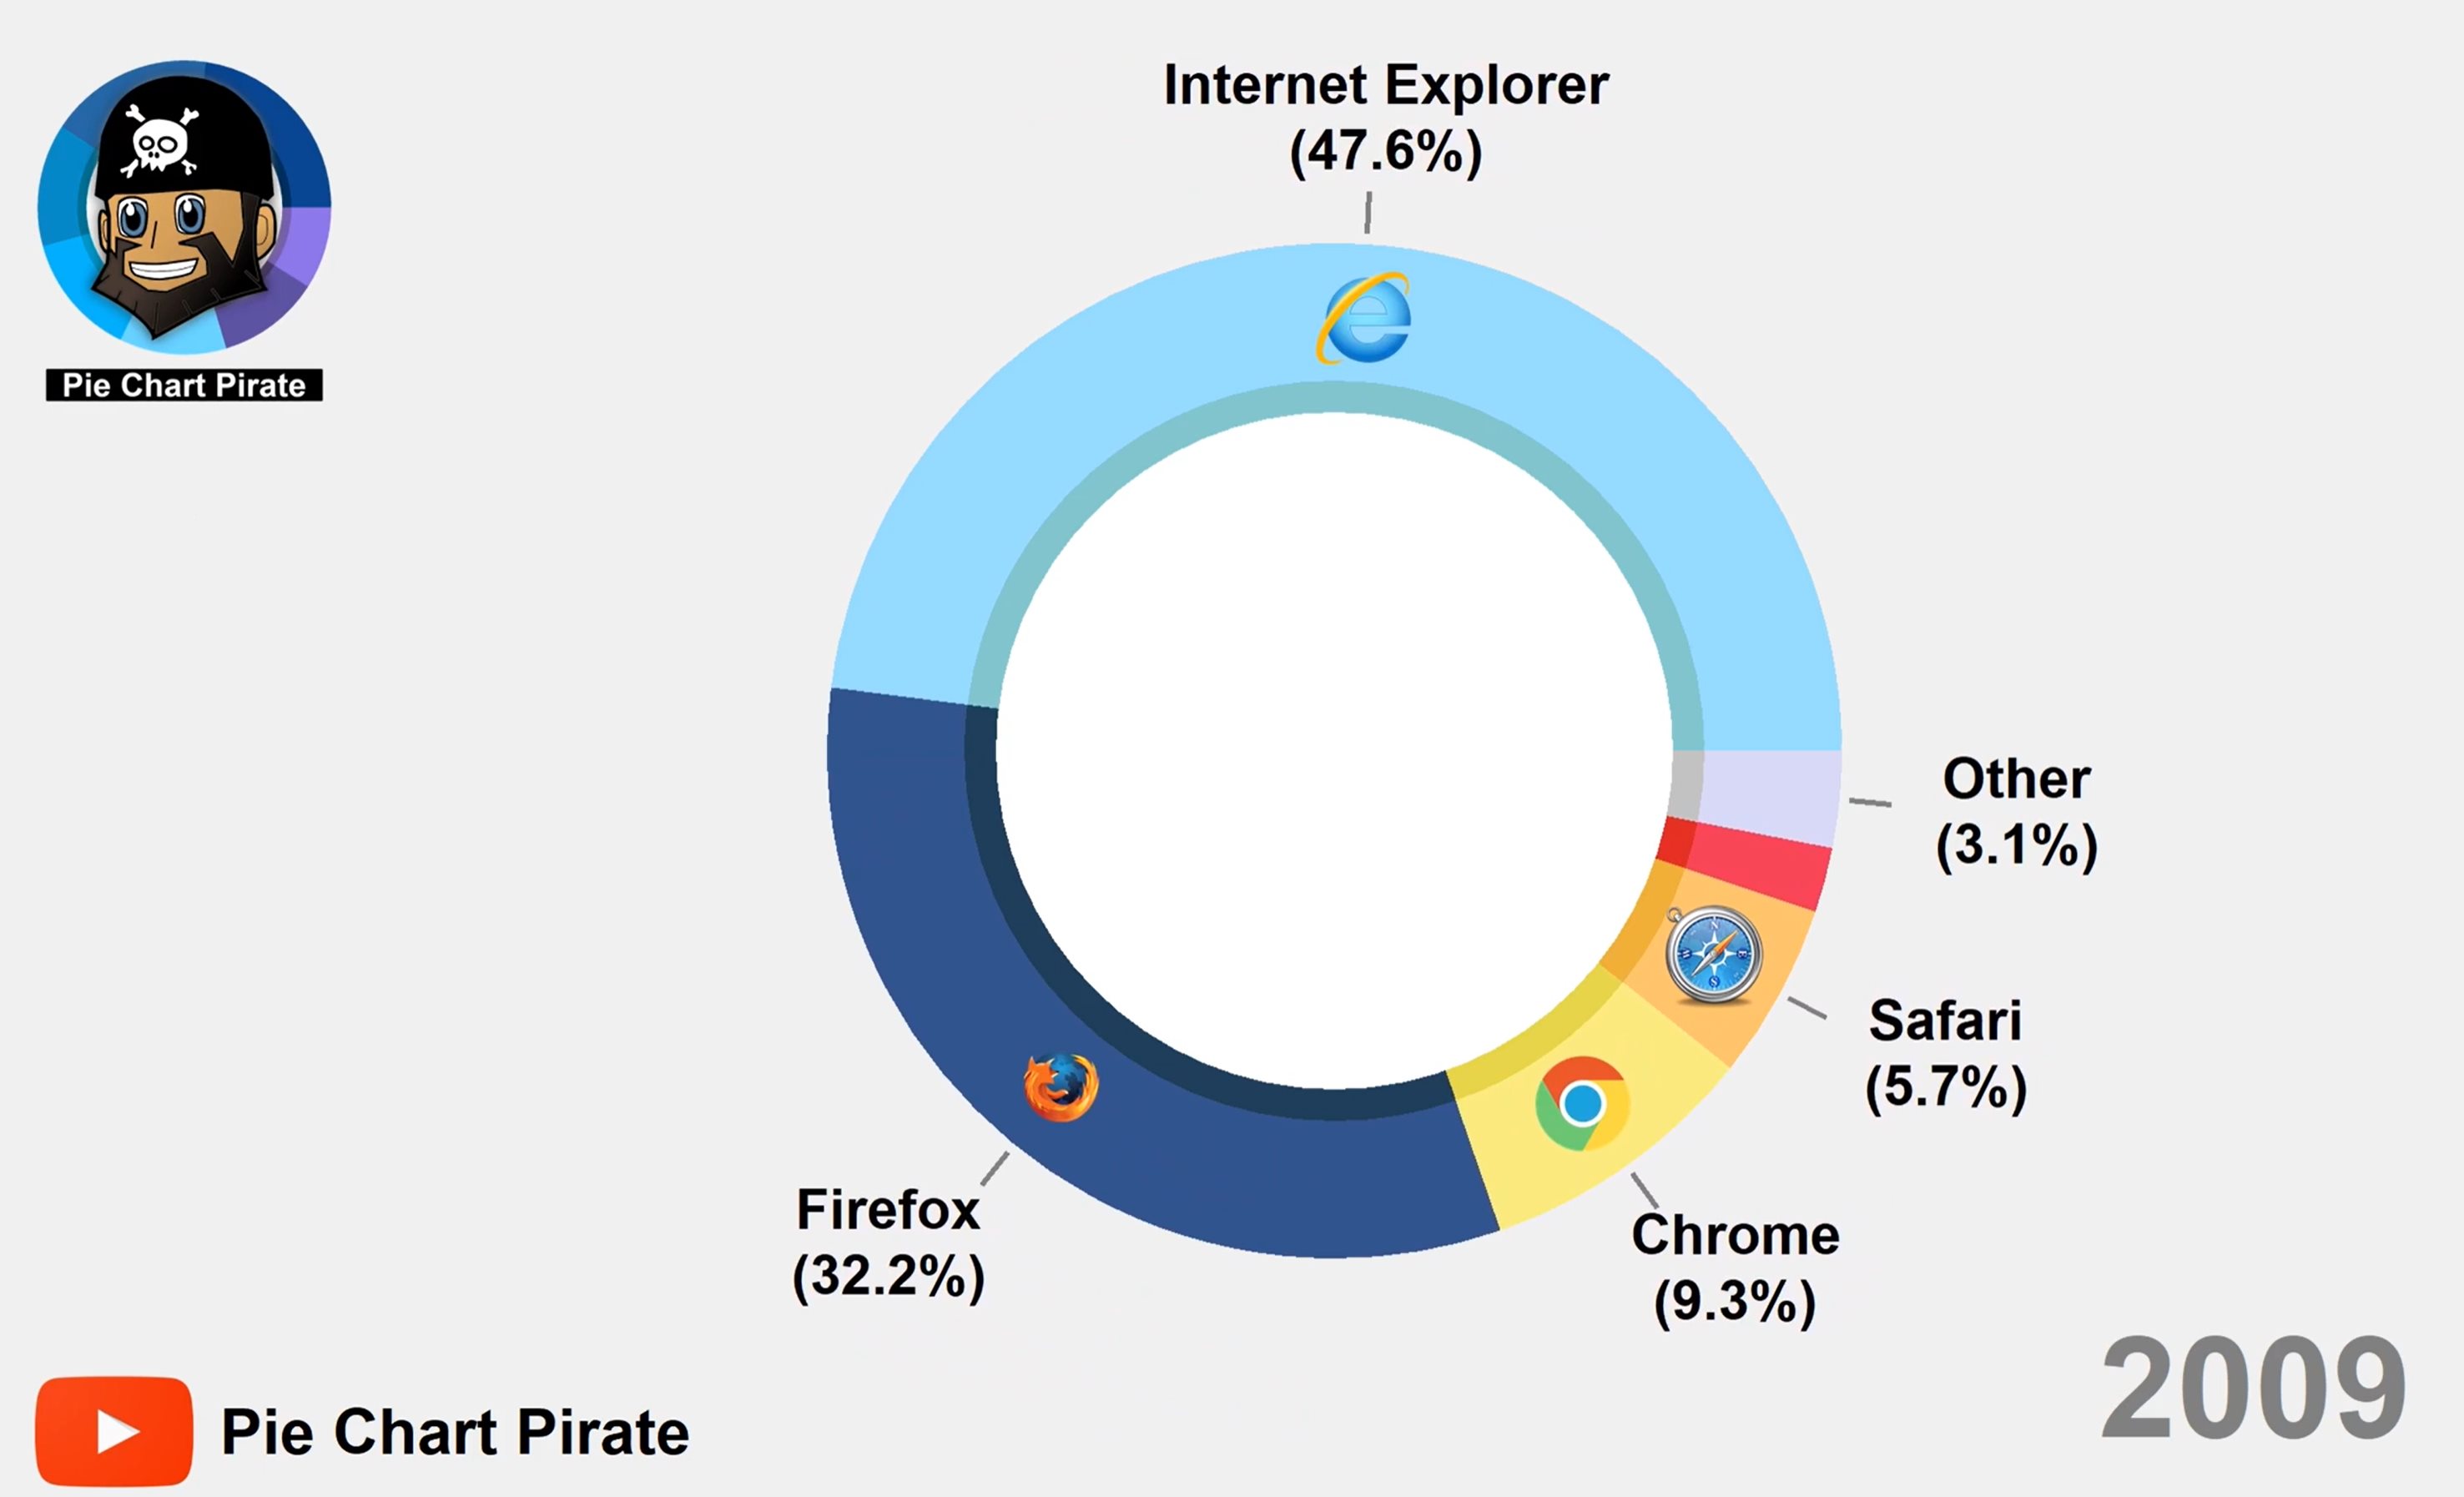 Here's How the Browser World Changed in the Last 25 Years